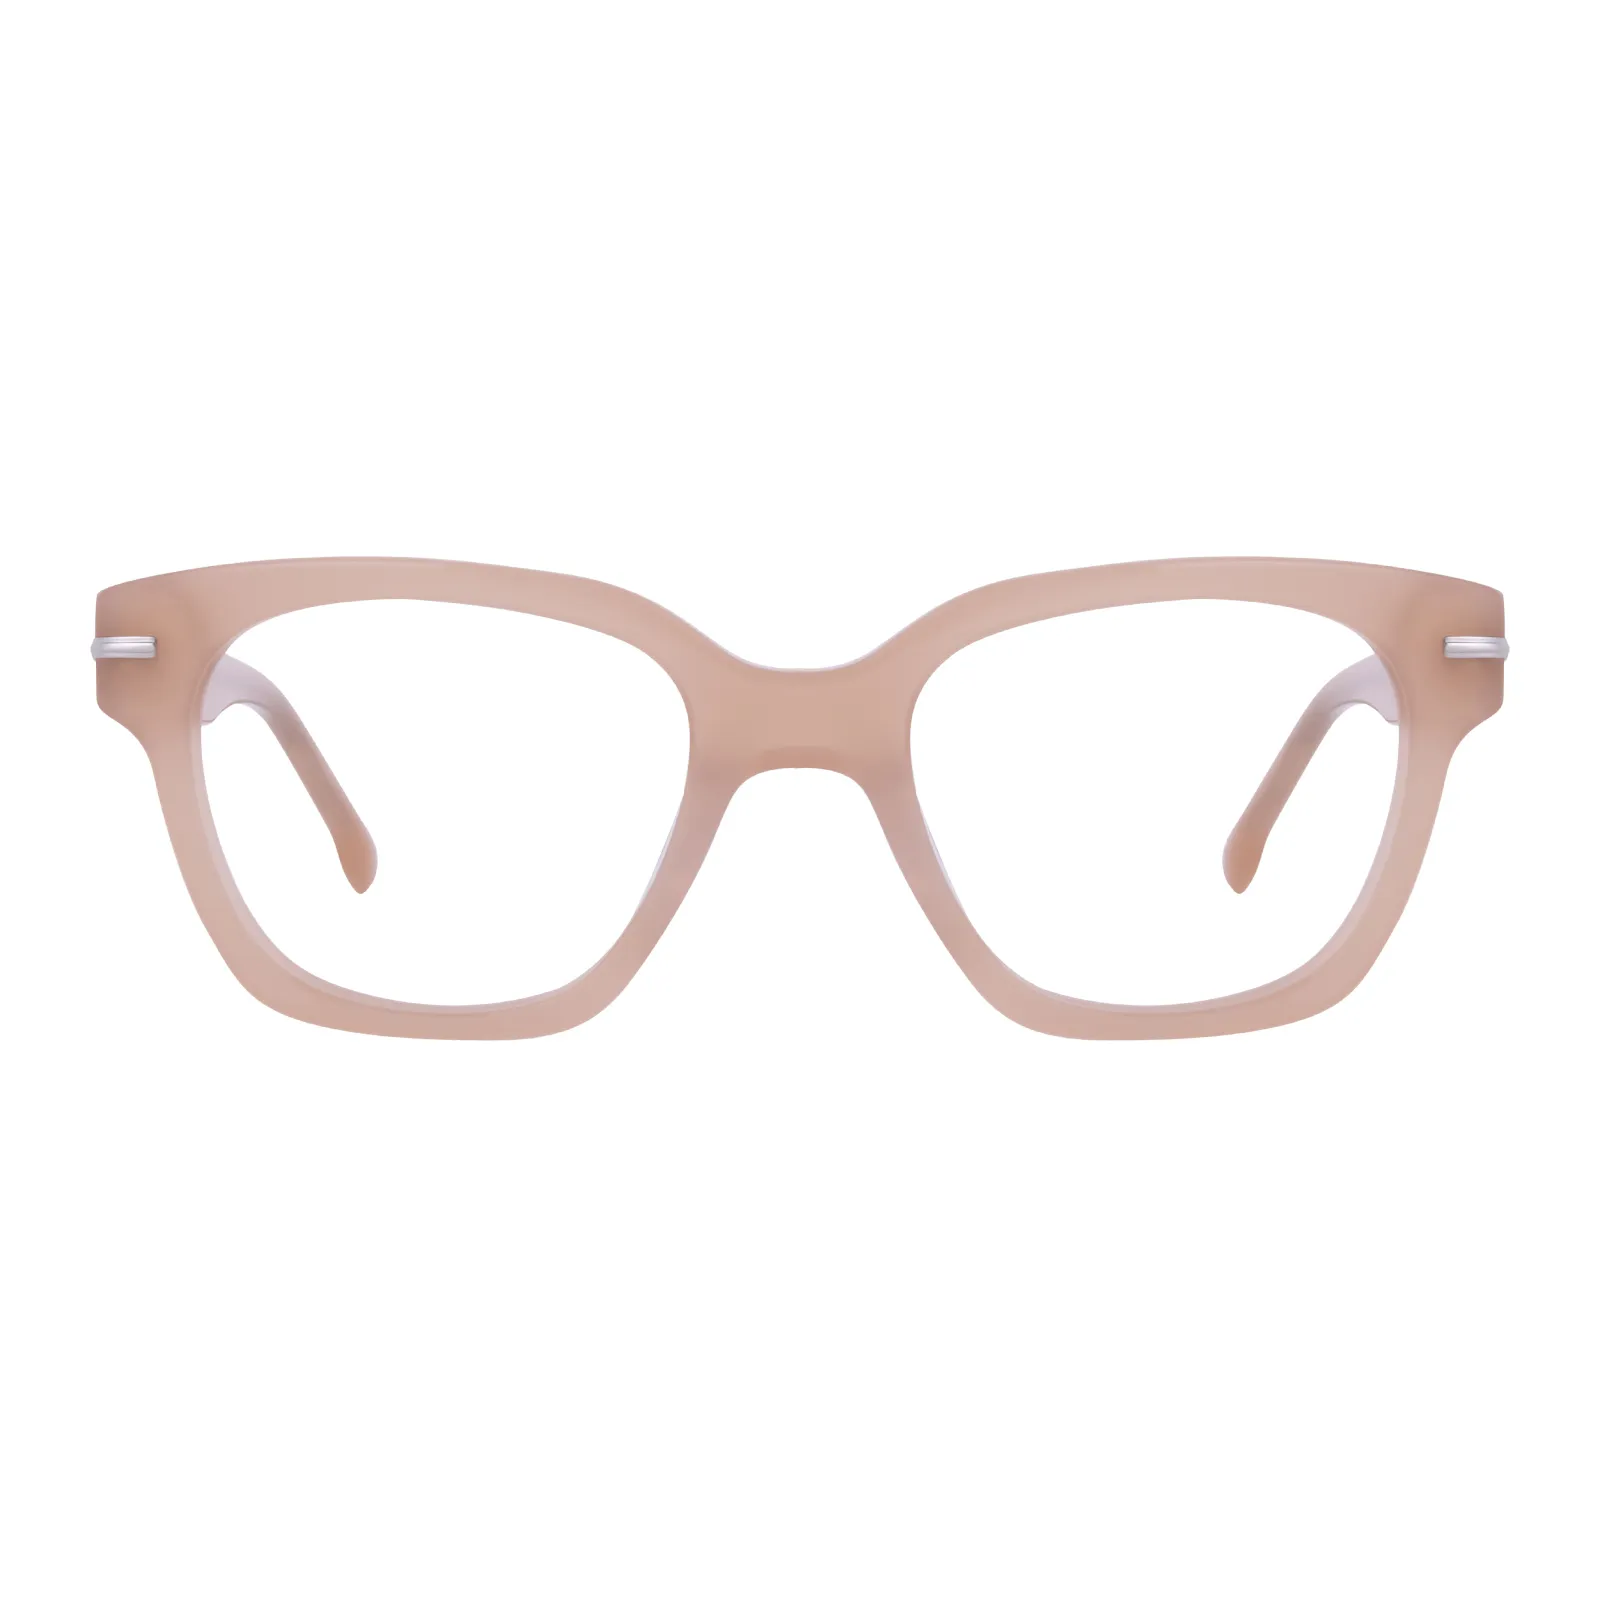 Phyllis - Square Bright-brown Glasses for Women